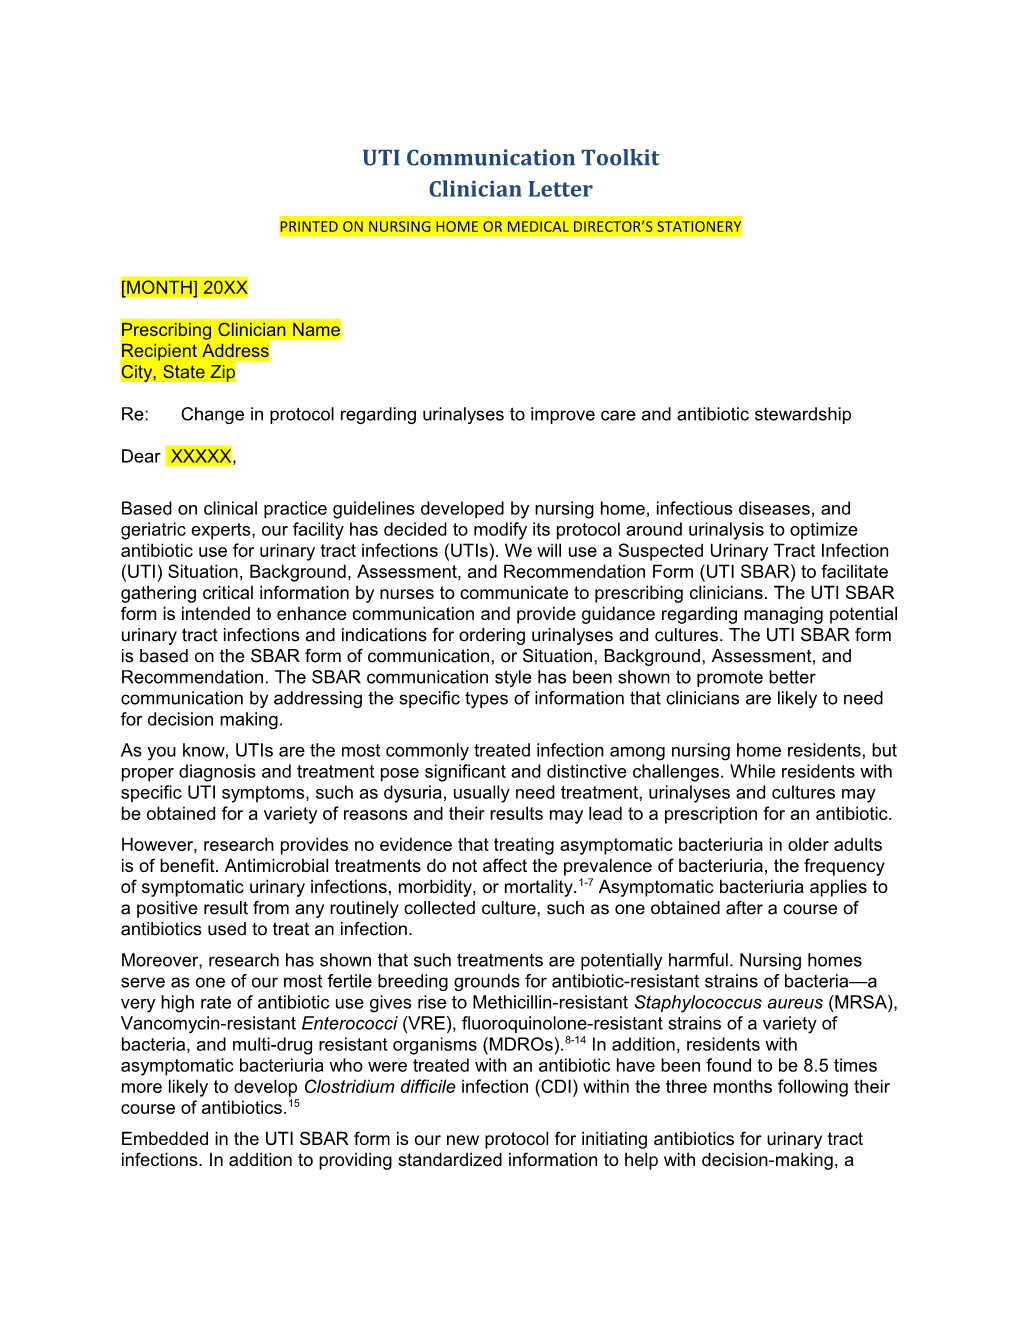 UTI Communication Toolkit Clinician Letter Page 2 of 2